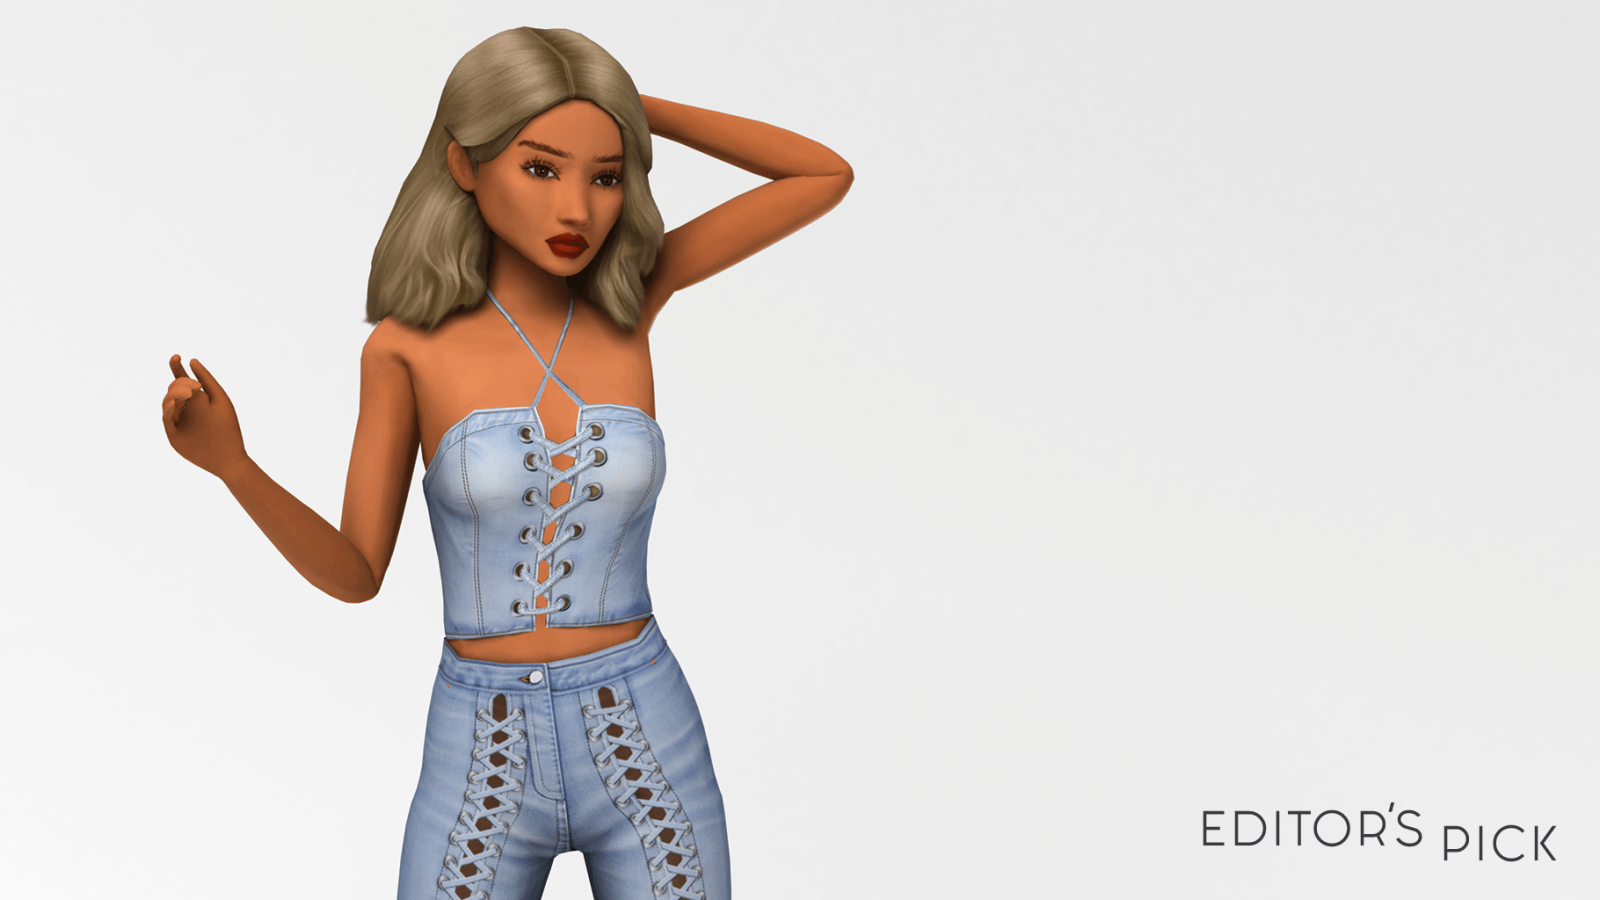 Editors Pick - Linked Together Outfit - Avakin